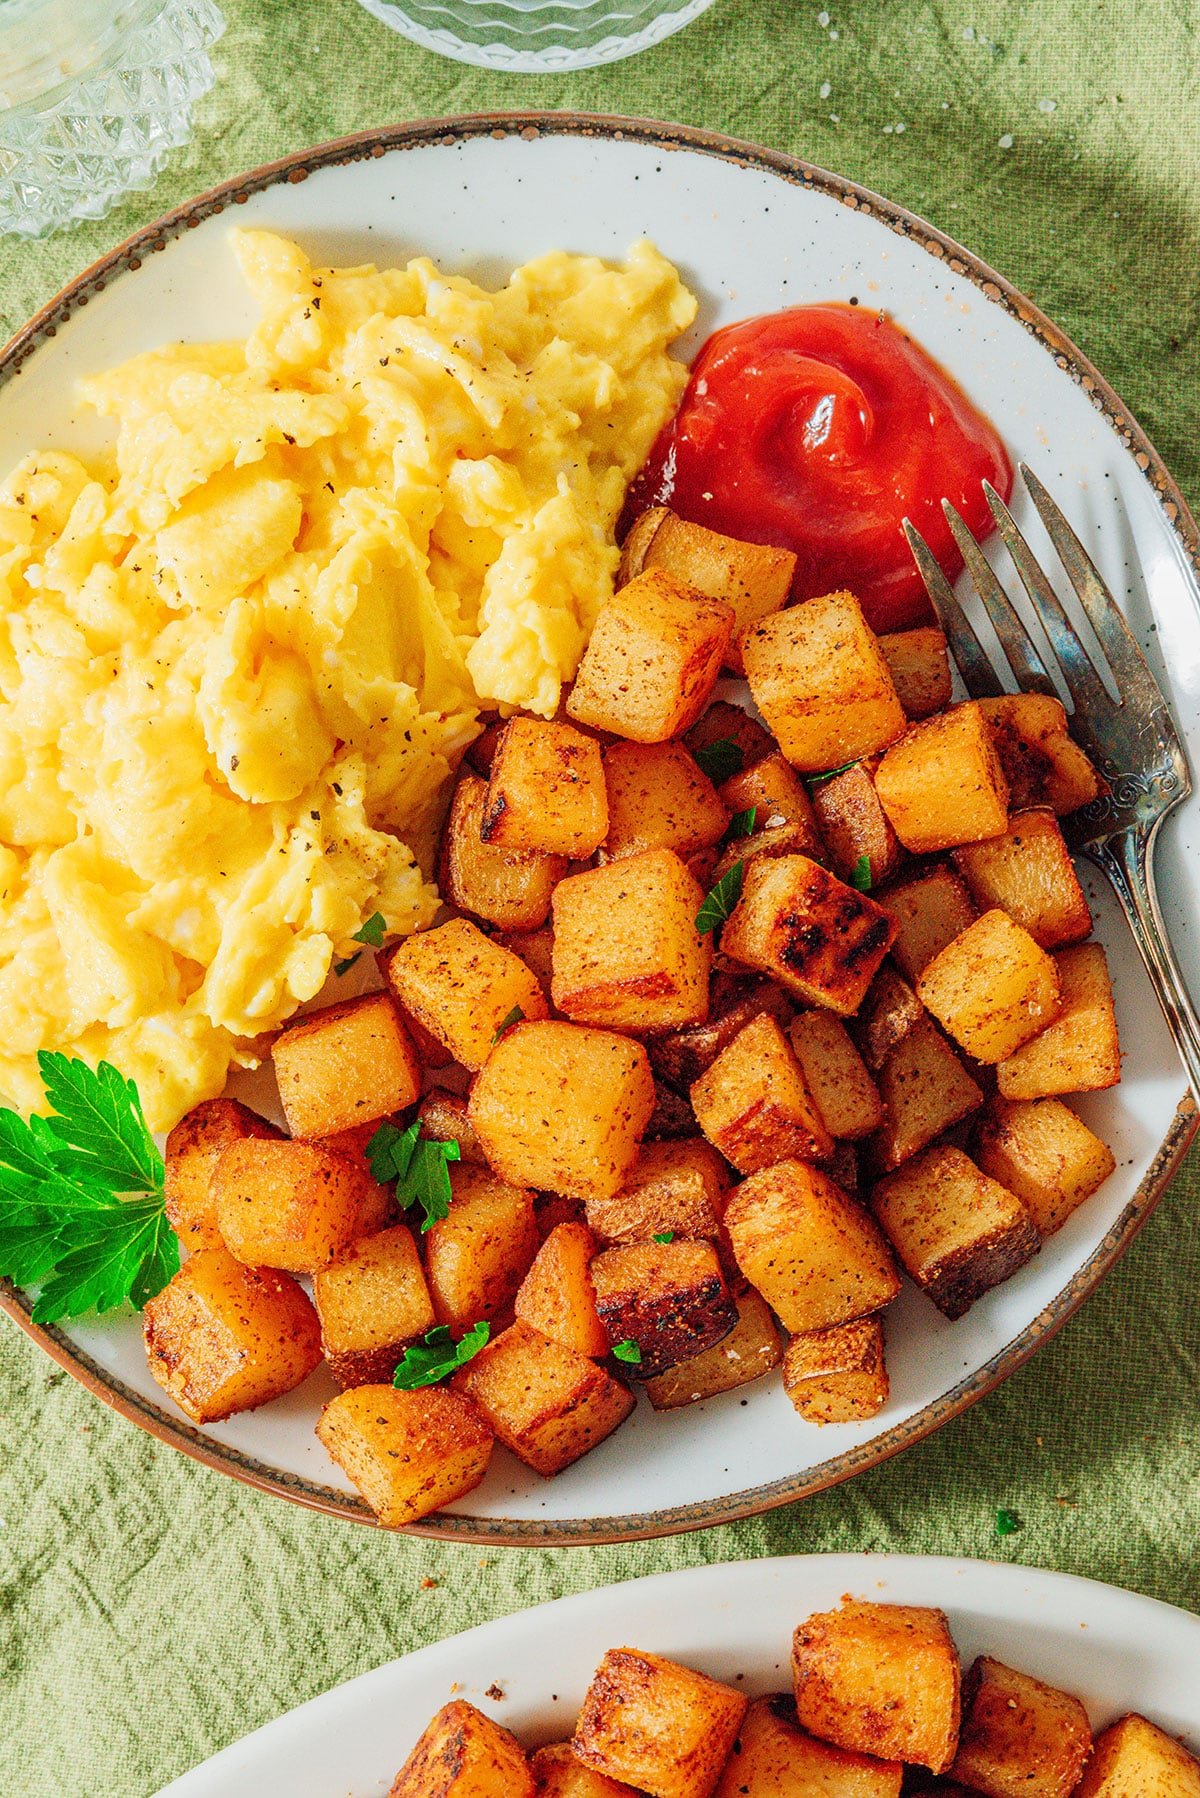 Breakfast potatoes with eggs and ketchup.